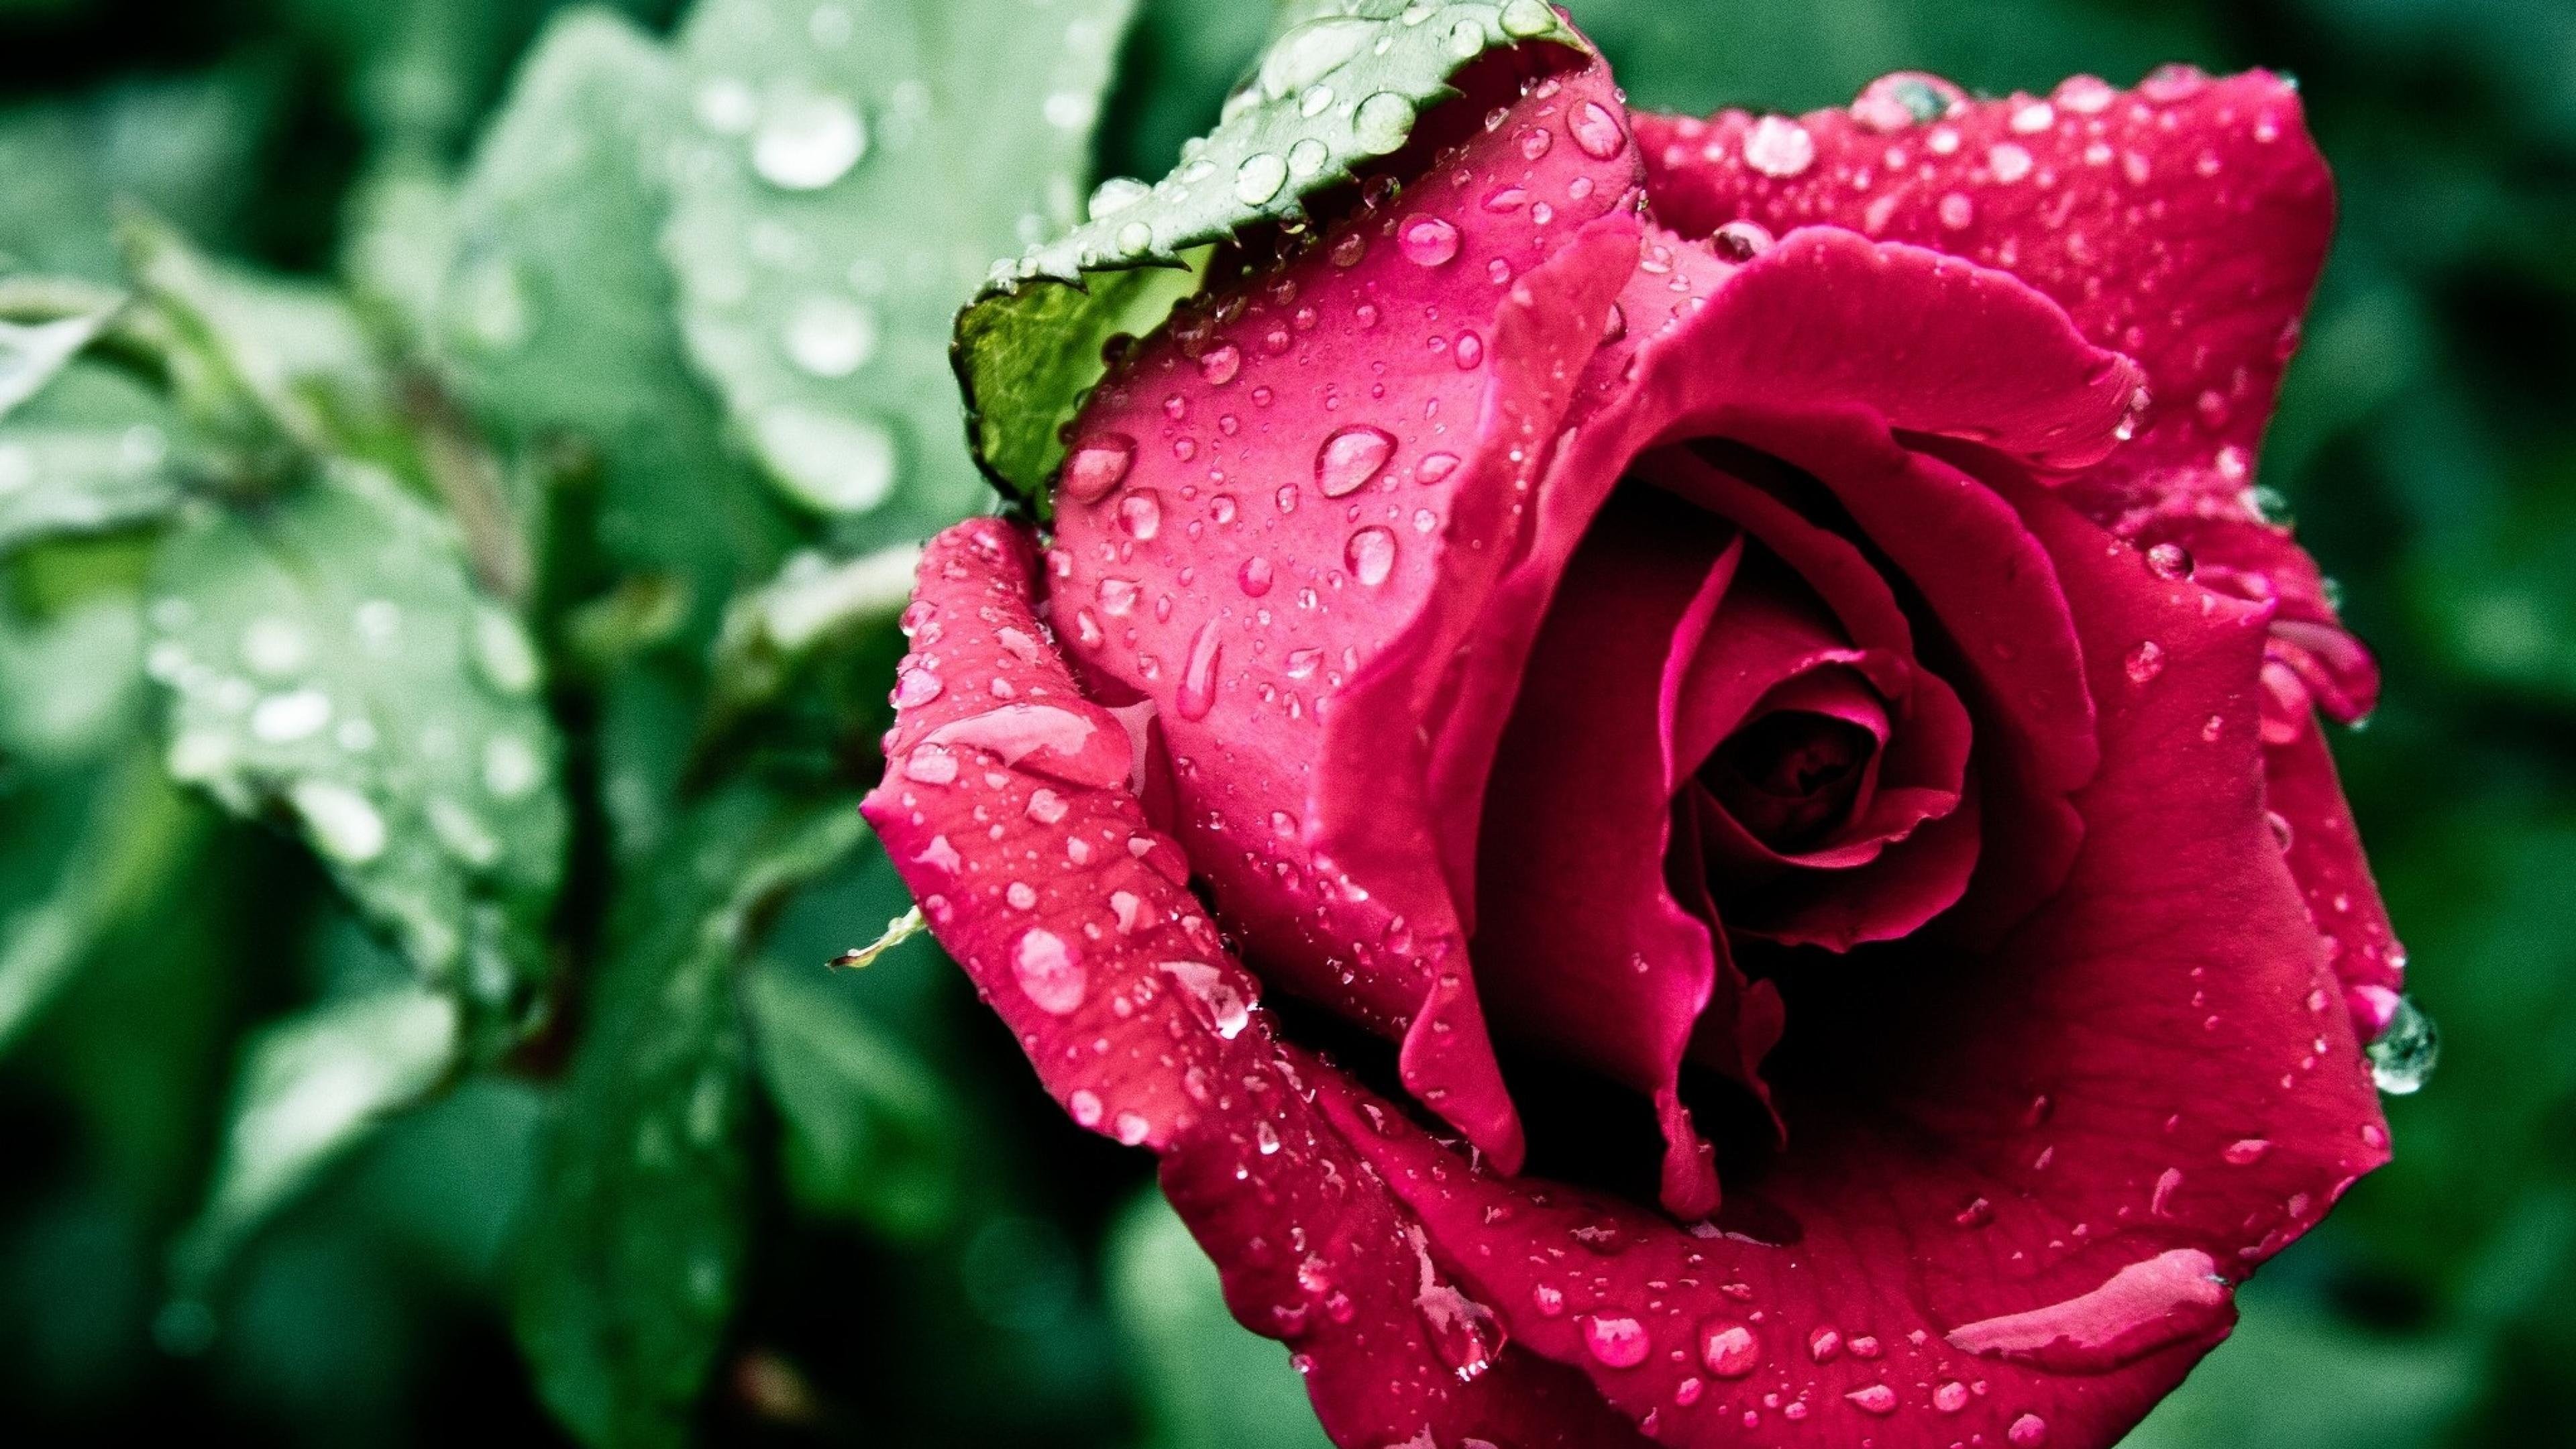 3840x2160 ... Nature wallpaper with wet red flower rose